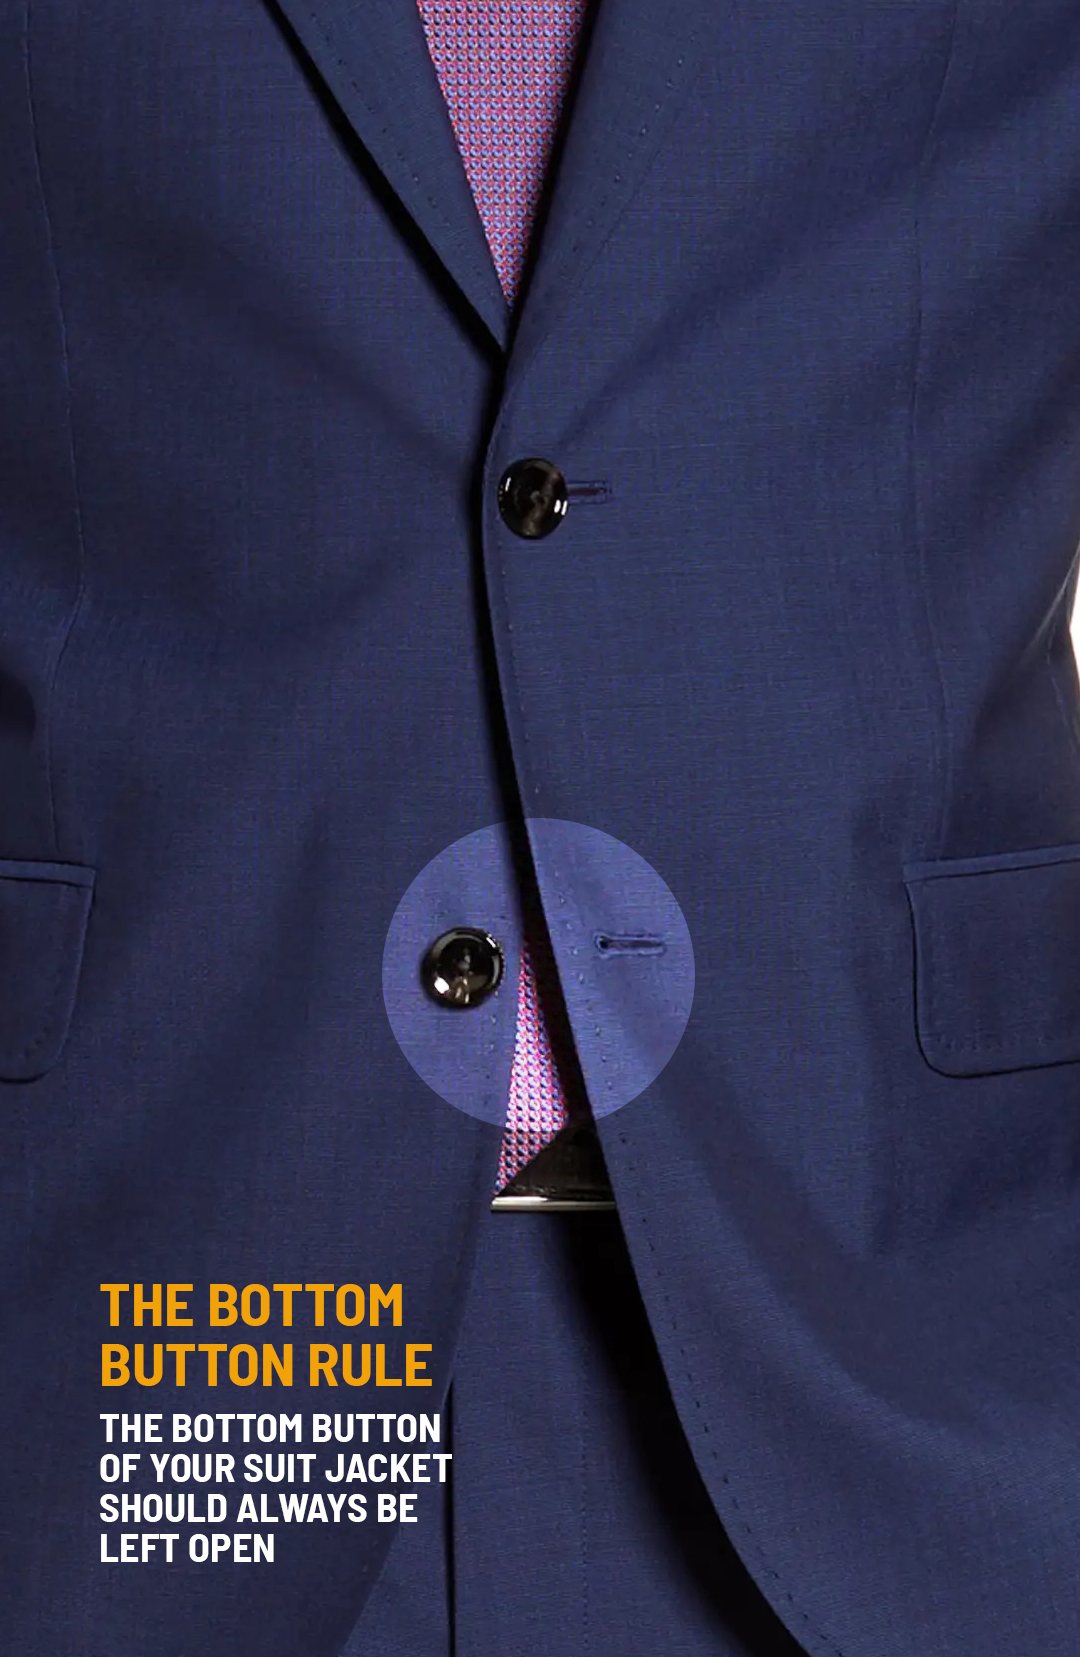 The bottom button rule: leave the bottom button of the jacket open